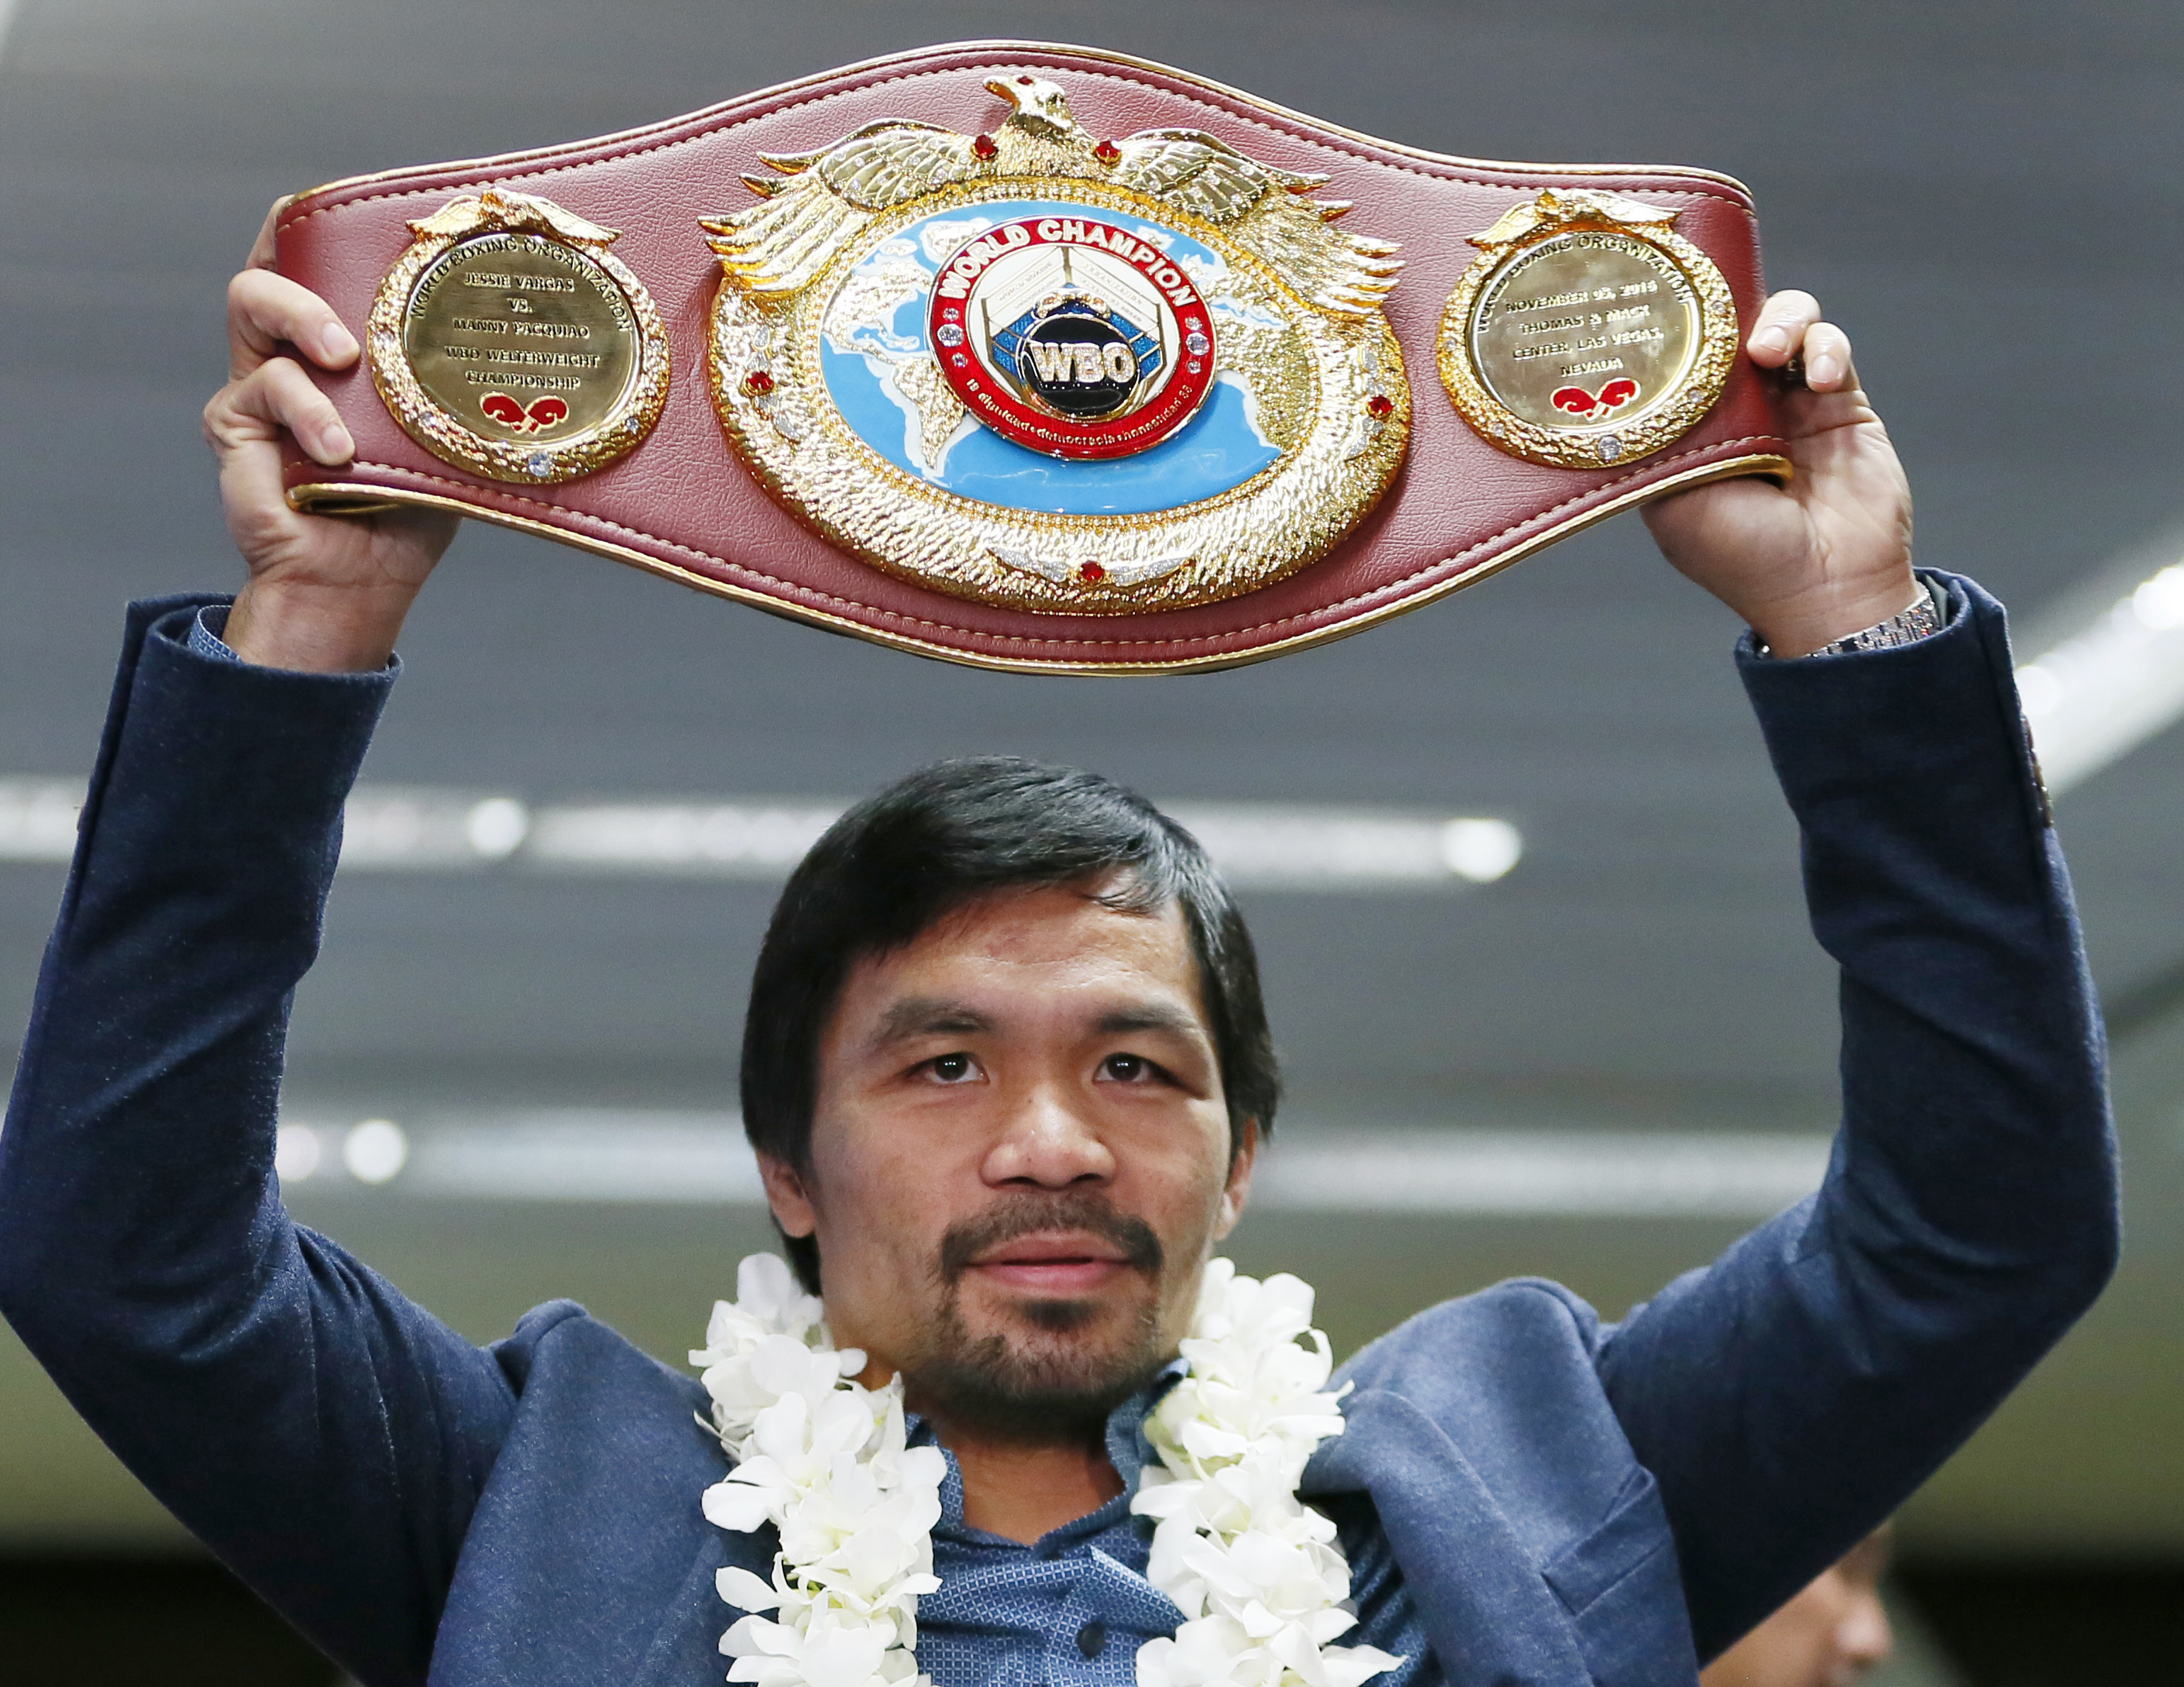 Filipino boxer Manny Pacquiao raises his WBO welterweight championship belt during a news conference upon arrival at the Ninoy Aquino International Airport in Pasay city, southeast of Manila, Philippines. Pacquiao, 38, will add another fight to his long career resume when he takes on Australian welterweight Jeff Horn on April 23 at a venue to be decided. (AP Photo/Bullit Marquez, File)